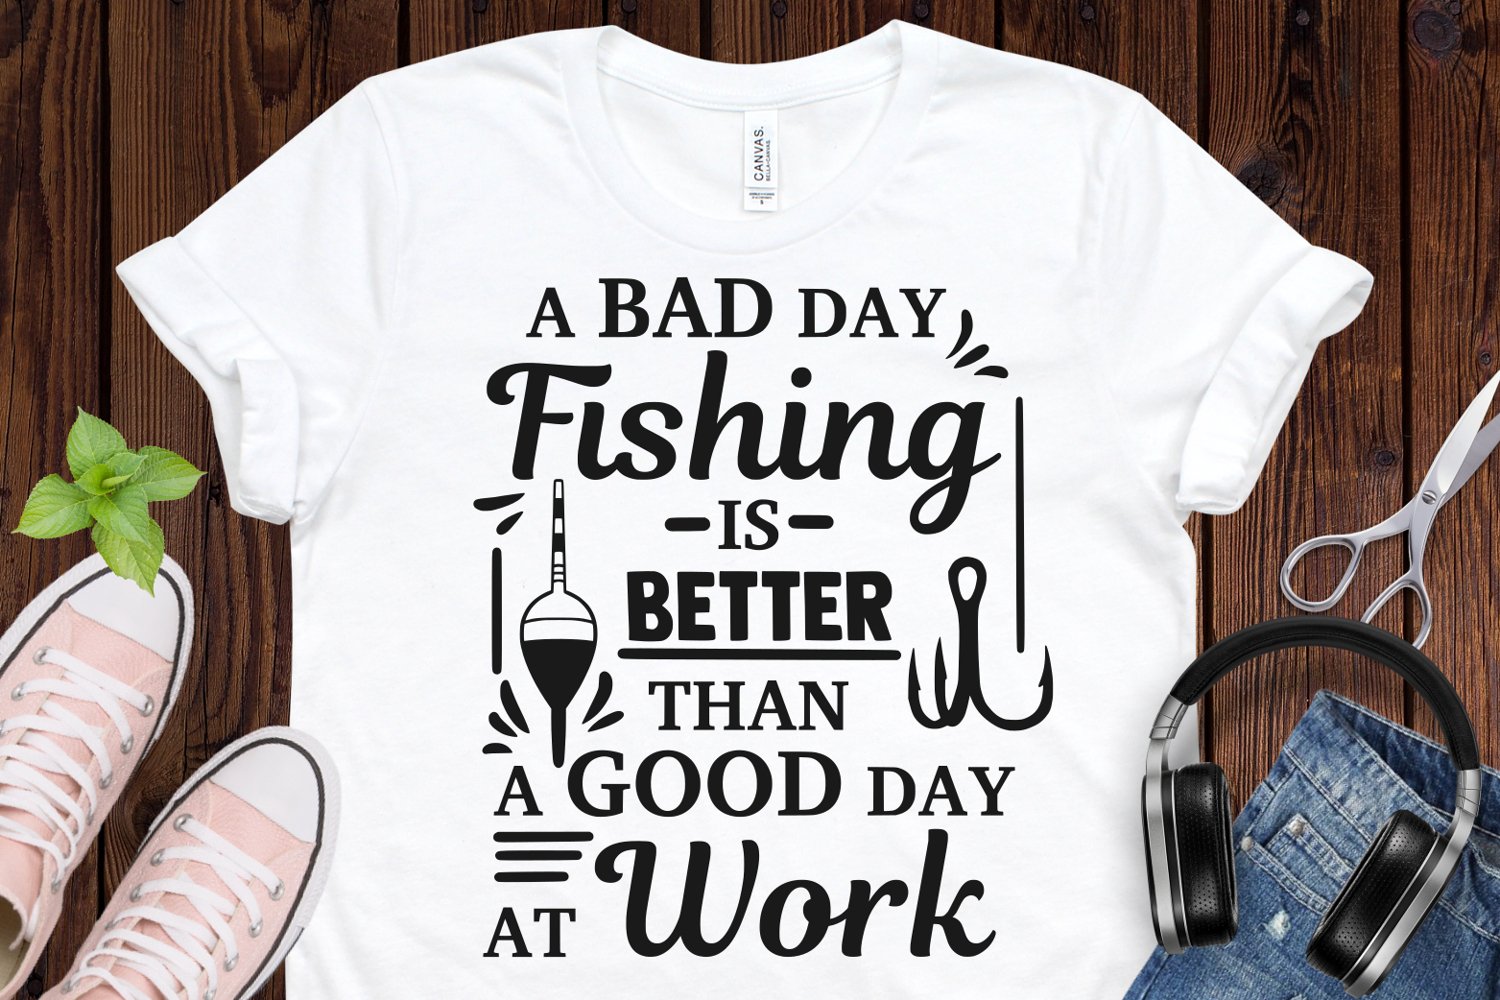 A bad fishing day is better than a good day at work.